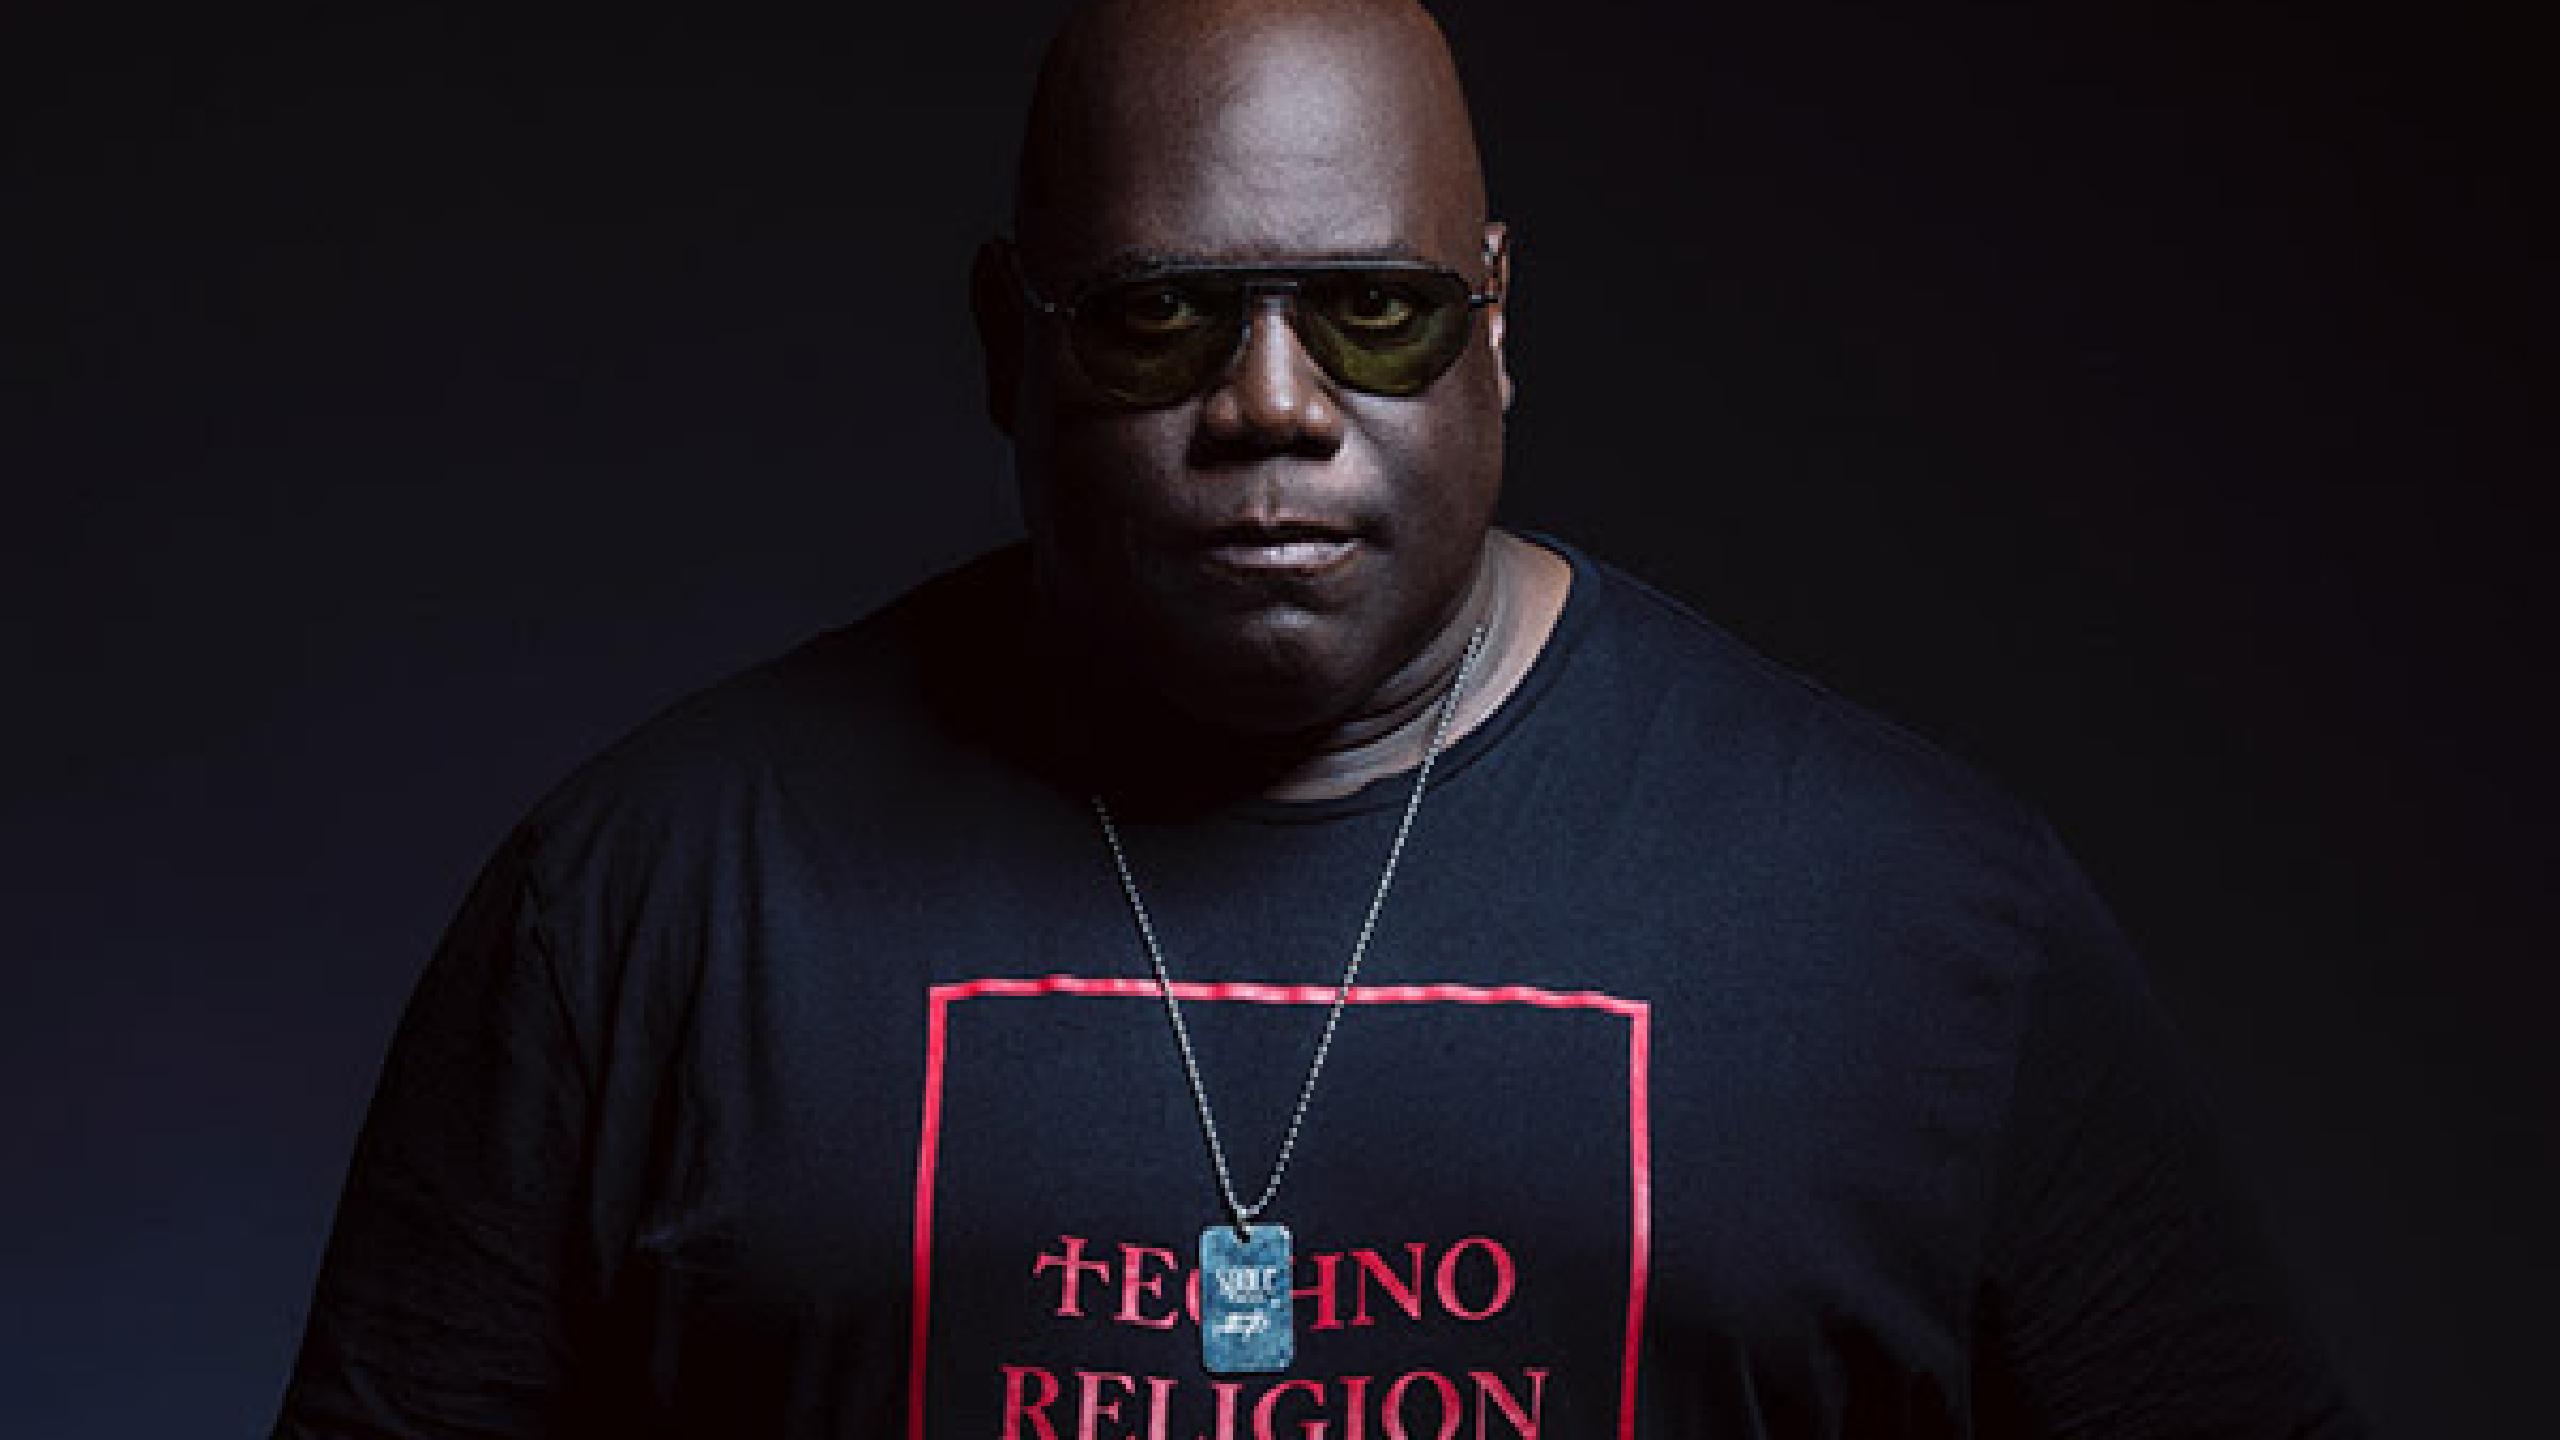 Carl Cox Tour Dates 2019 2020 Carl Cox Tickets And Concerts Wegow